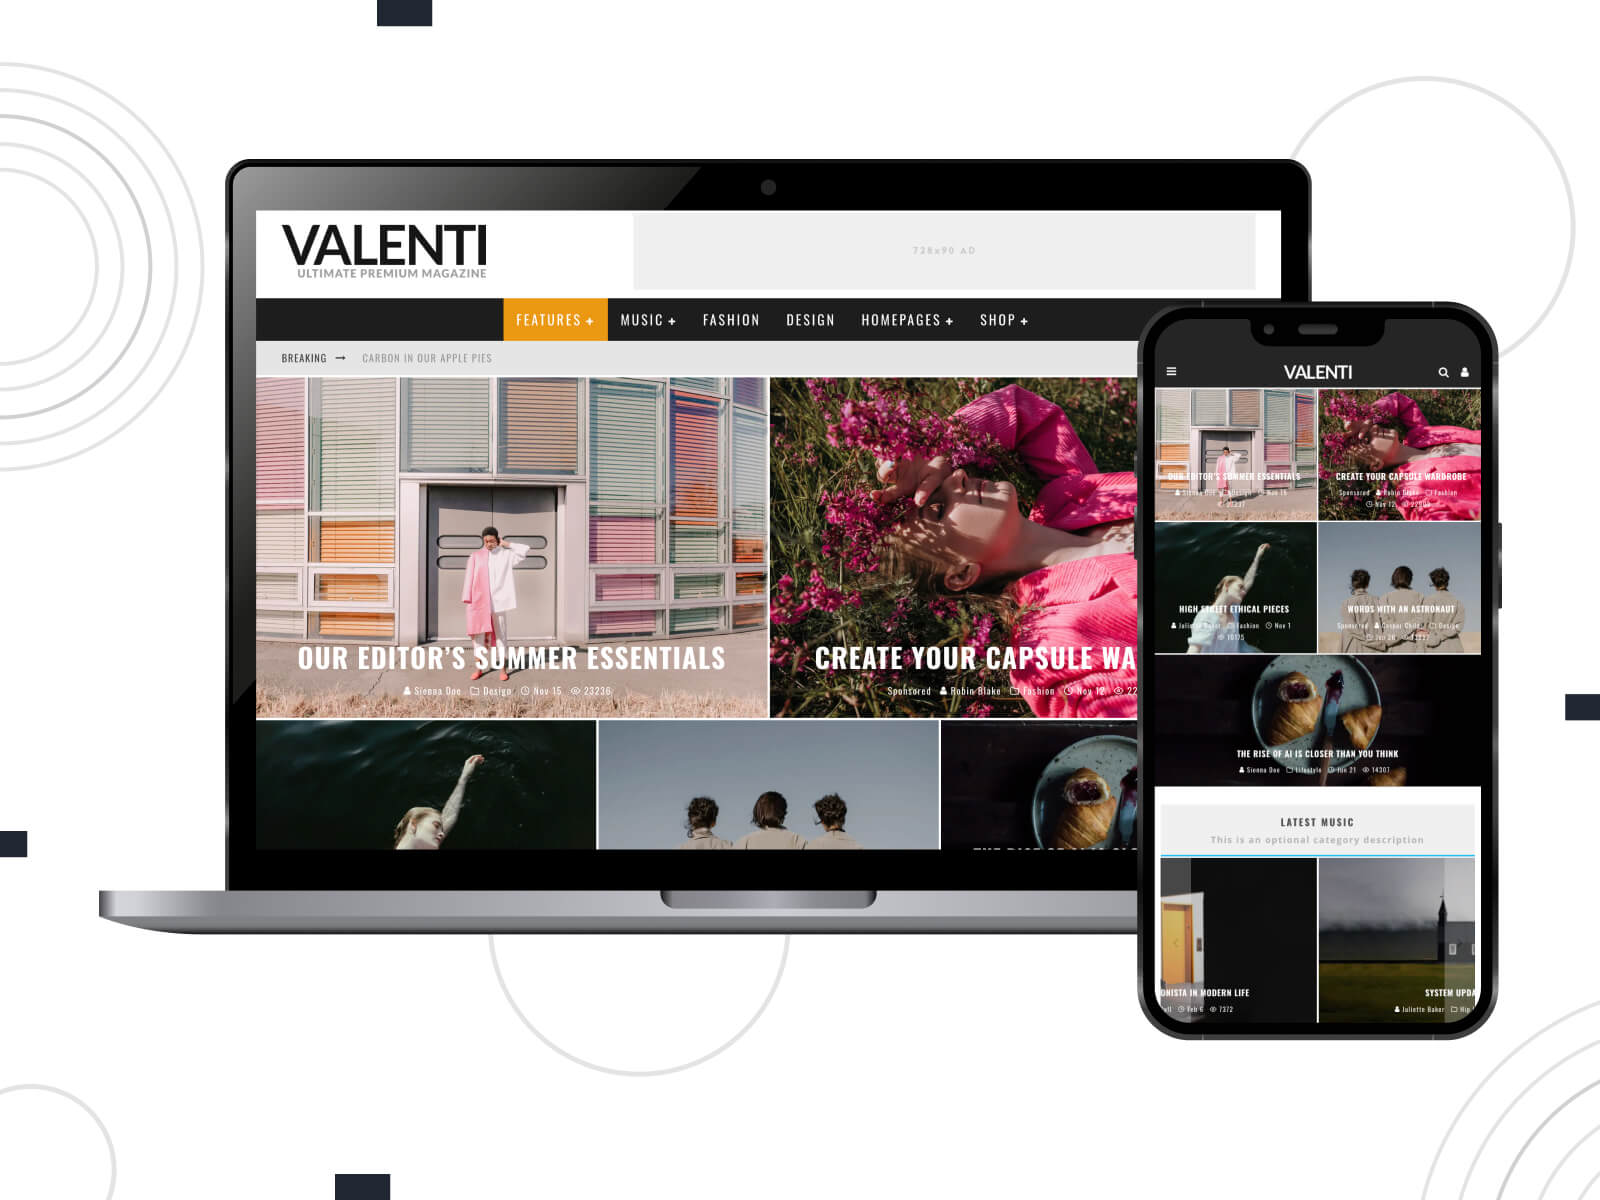 Collage of Valenti - dark, inviting, magazine-driven theme with detailed service listings in dark gray, sienna, and saddle brown color range.